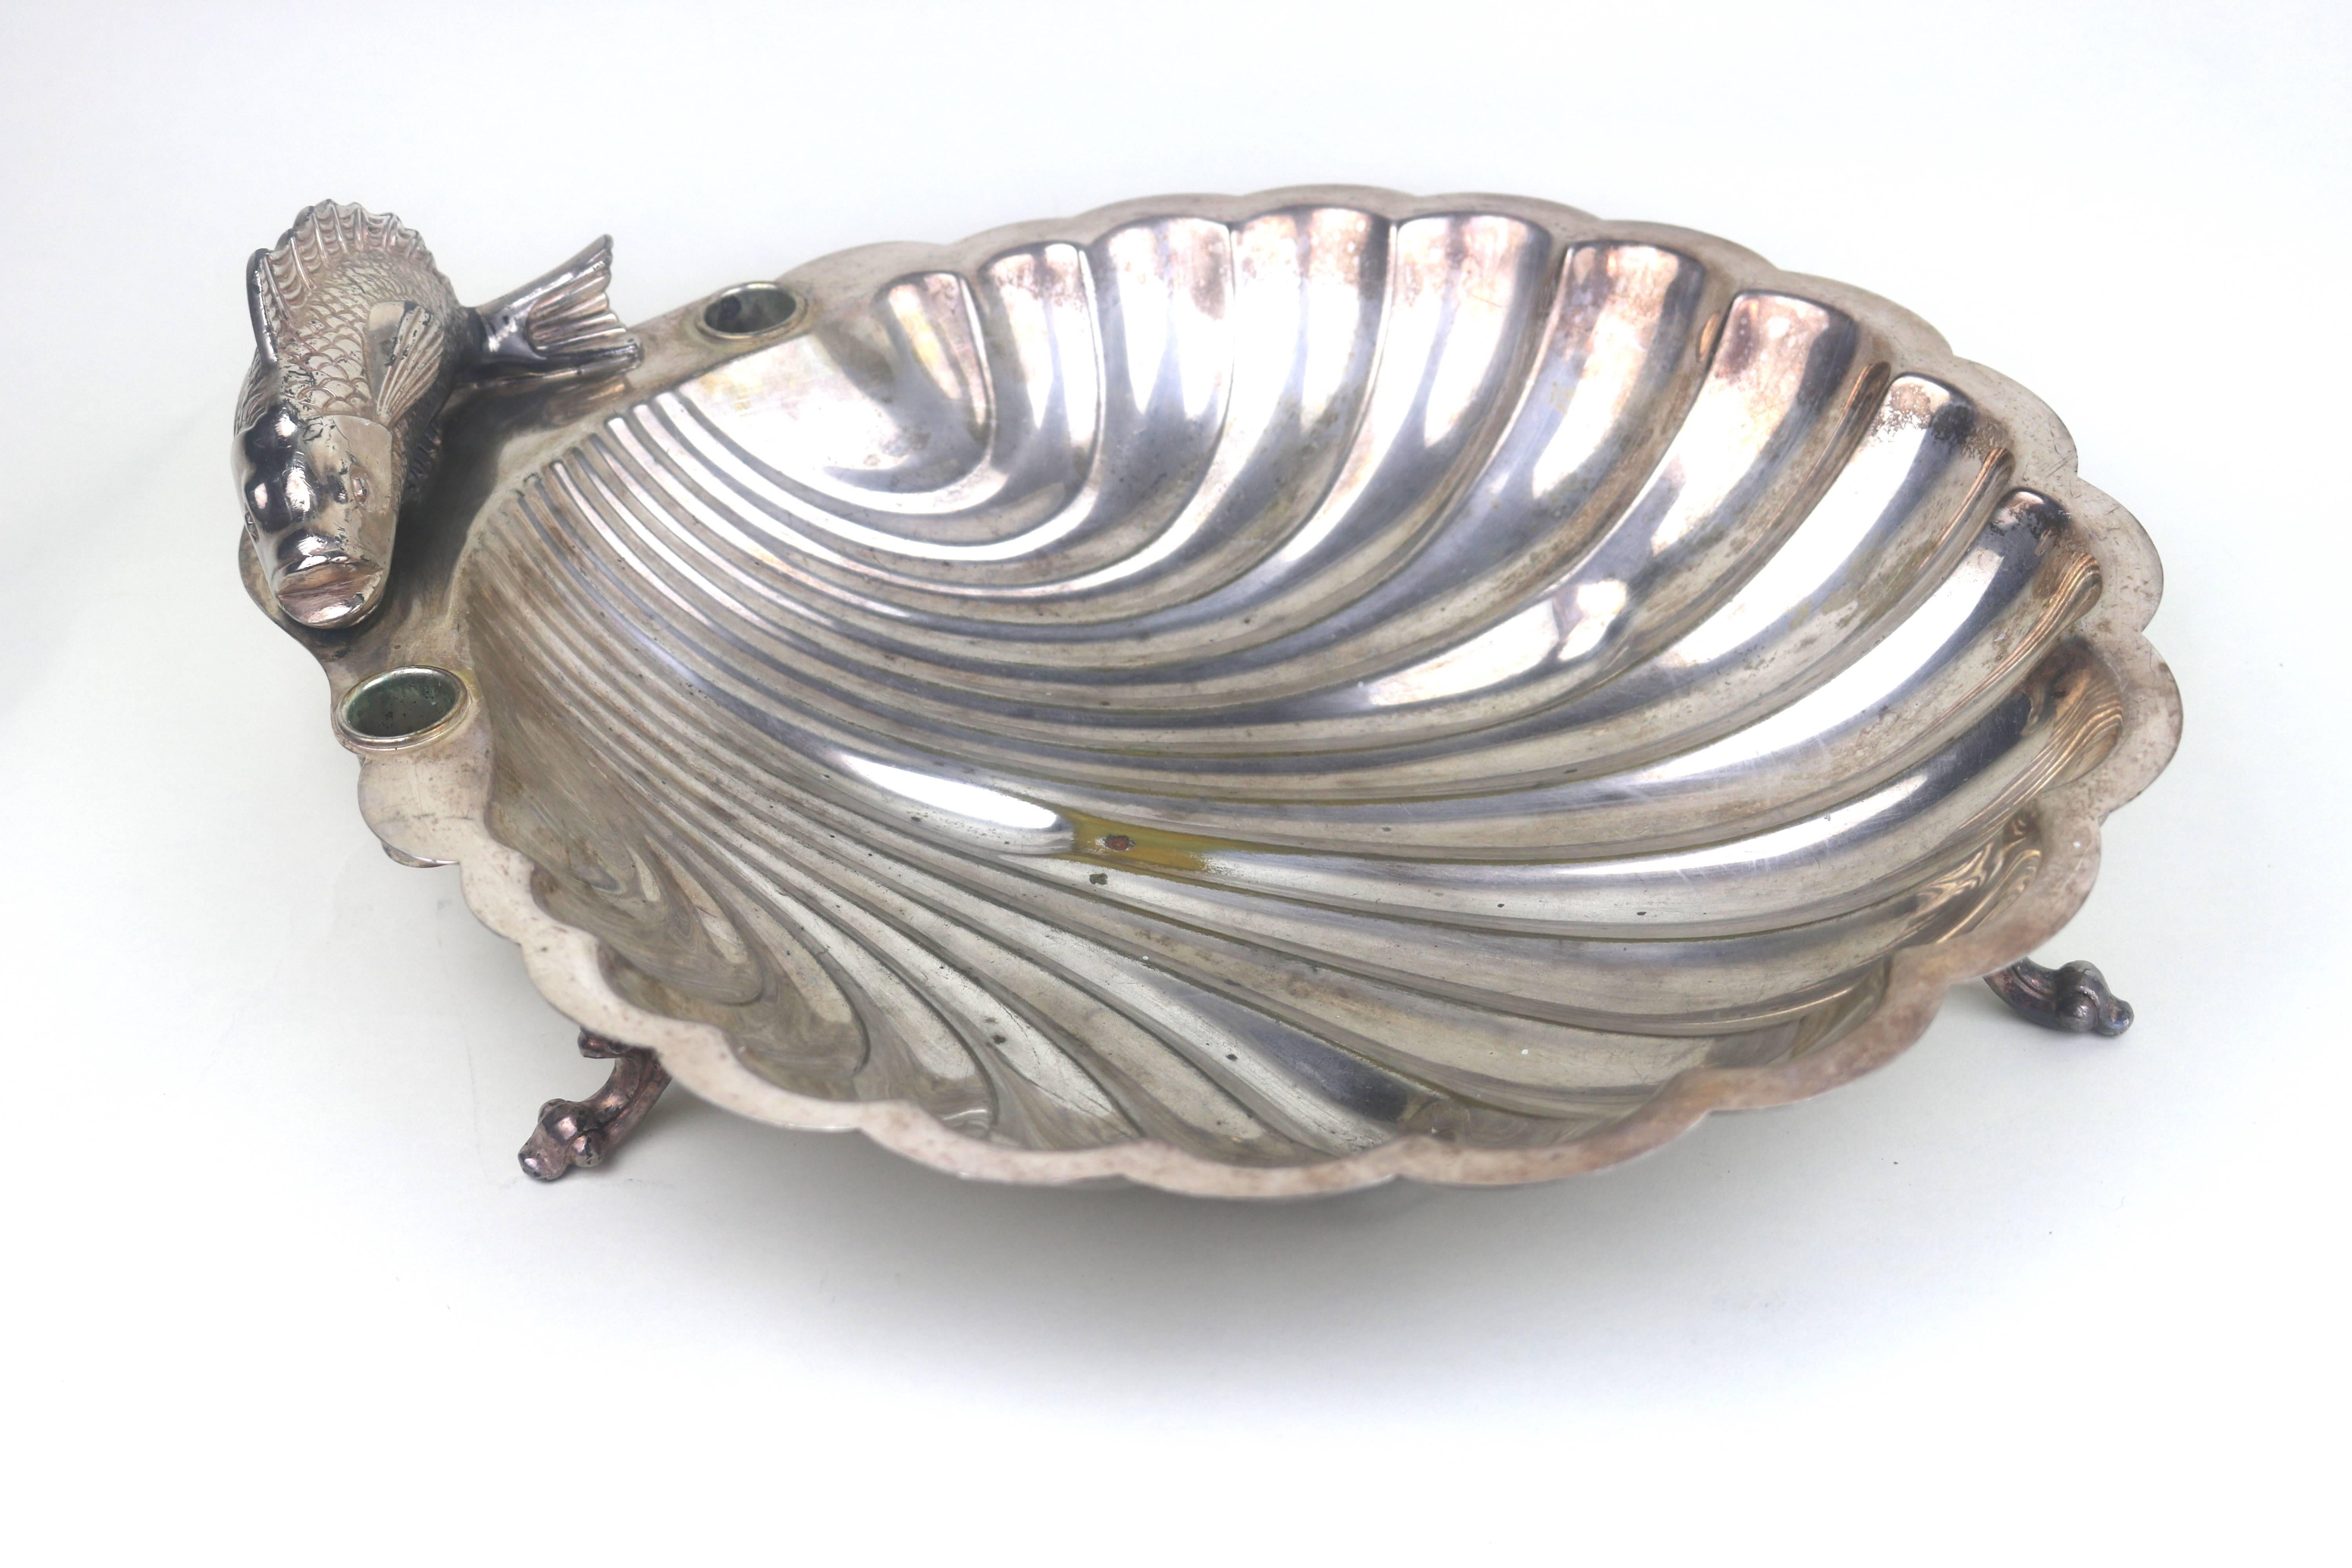 Beautiful Silver Plate on Copper Large Articulated Engraved Designed Fish Mounted scallop edged grooved pattern bowl with cups on each side for candles on three nicely detailed legs. a few areas of copper exposed.
A Beautiful and Memorable Serving